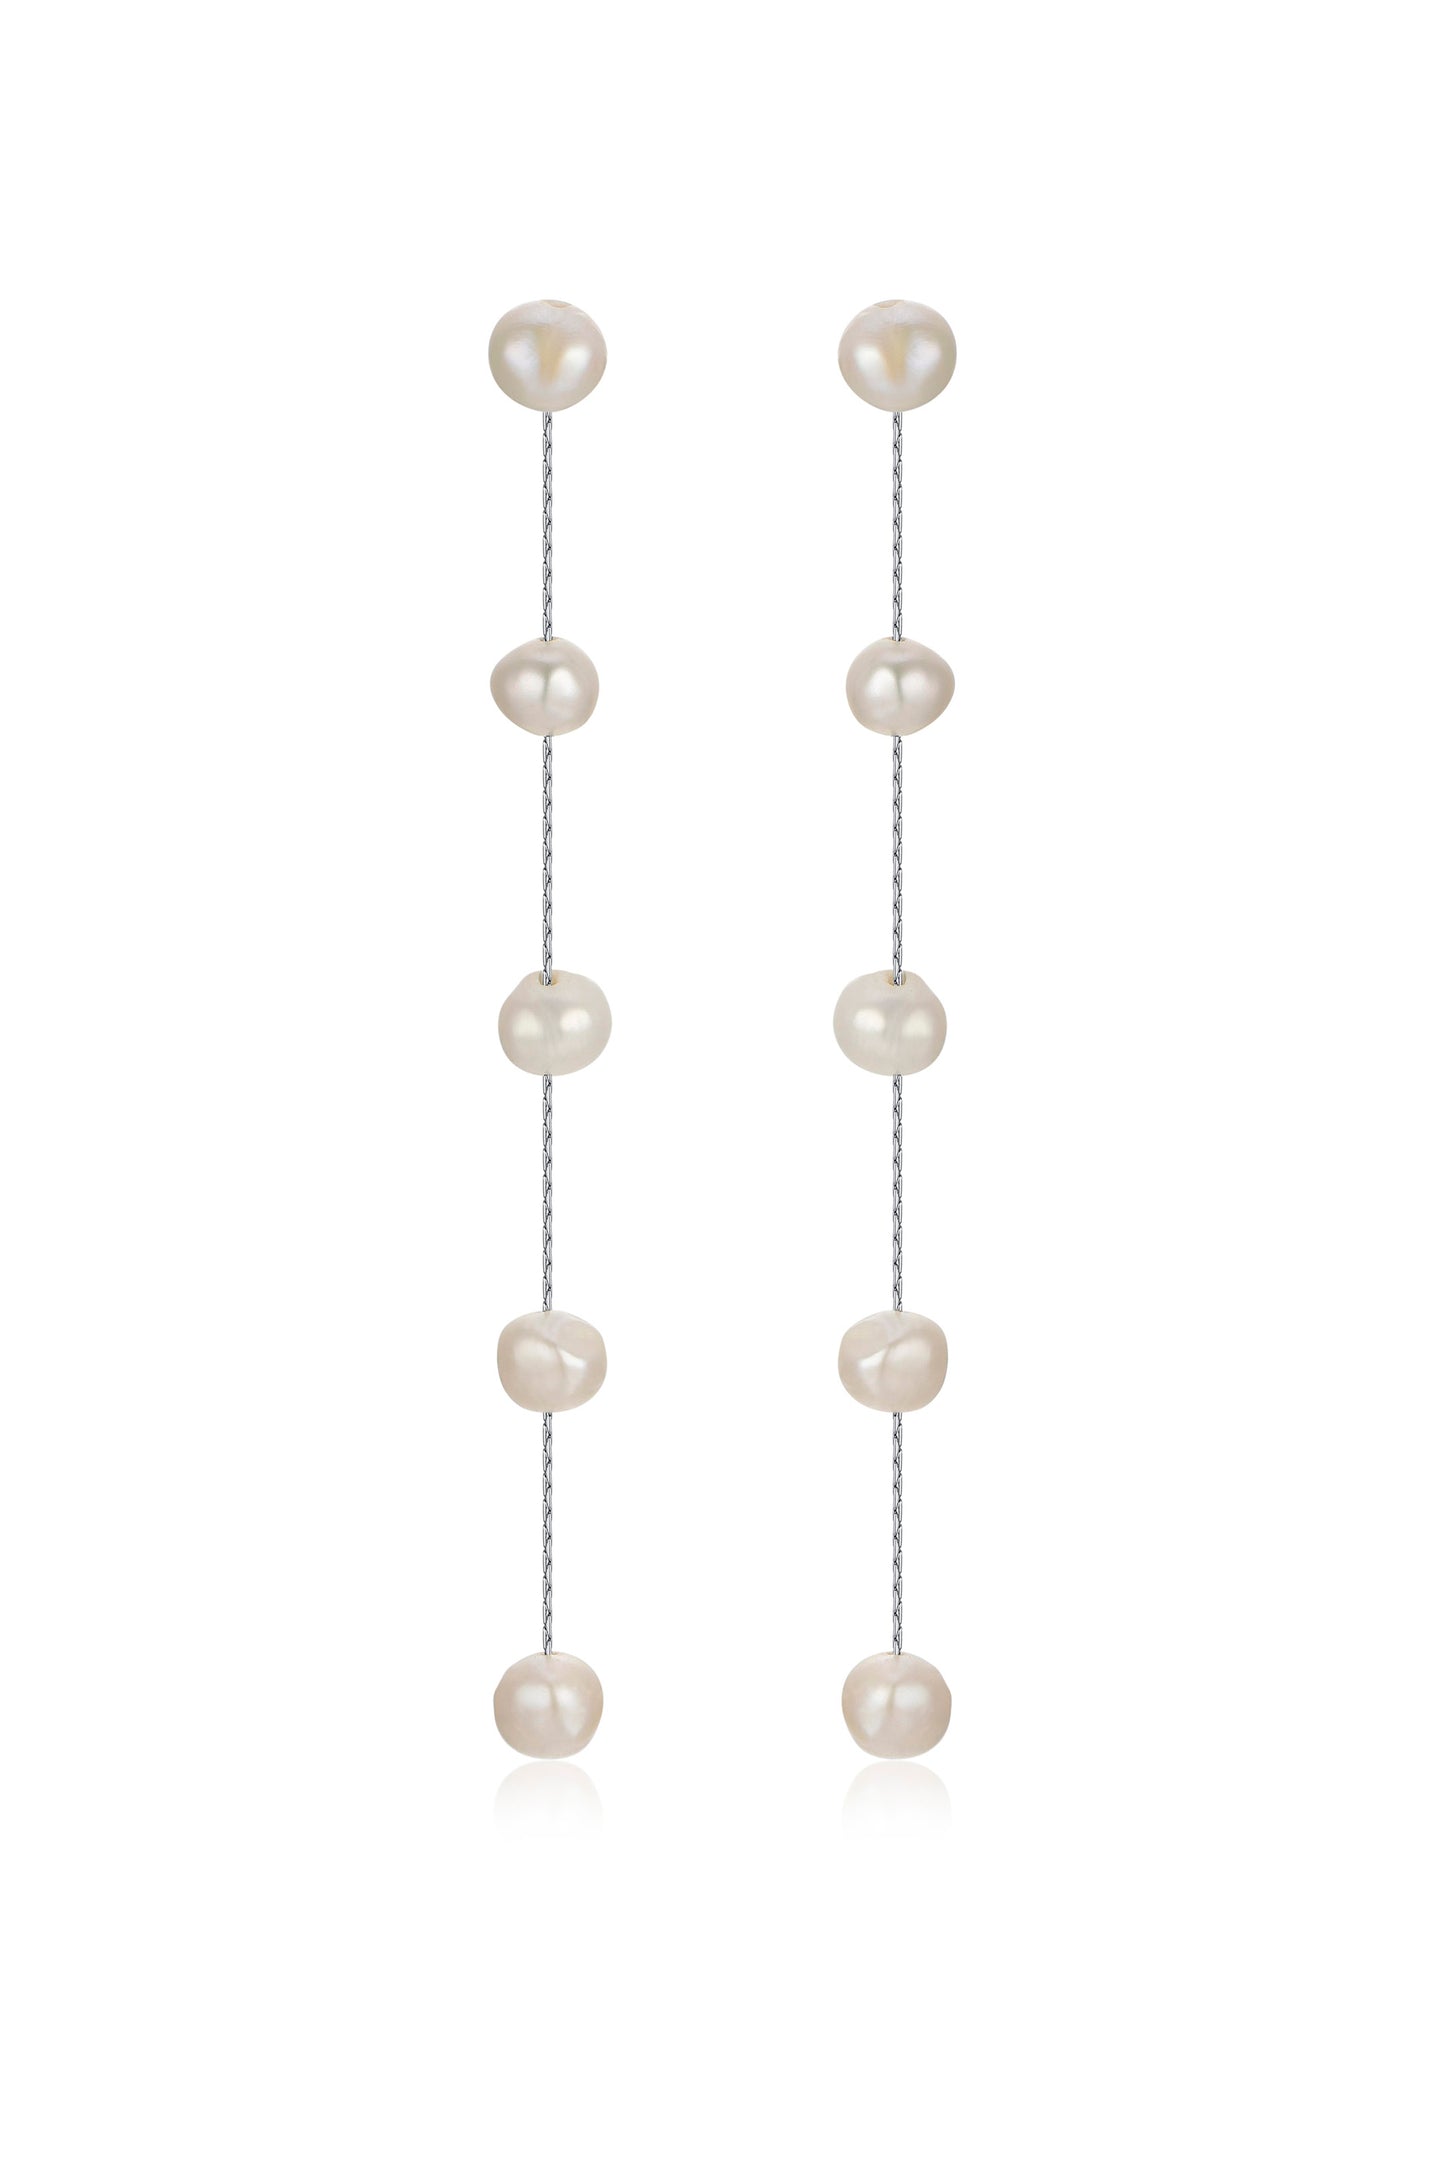 Dripping Pearl Delicate Drop Earrings white pearl rhodium chain front view